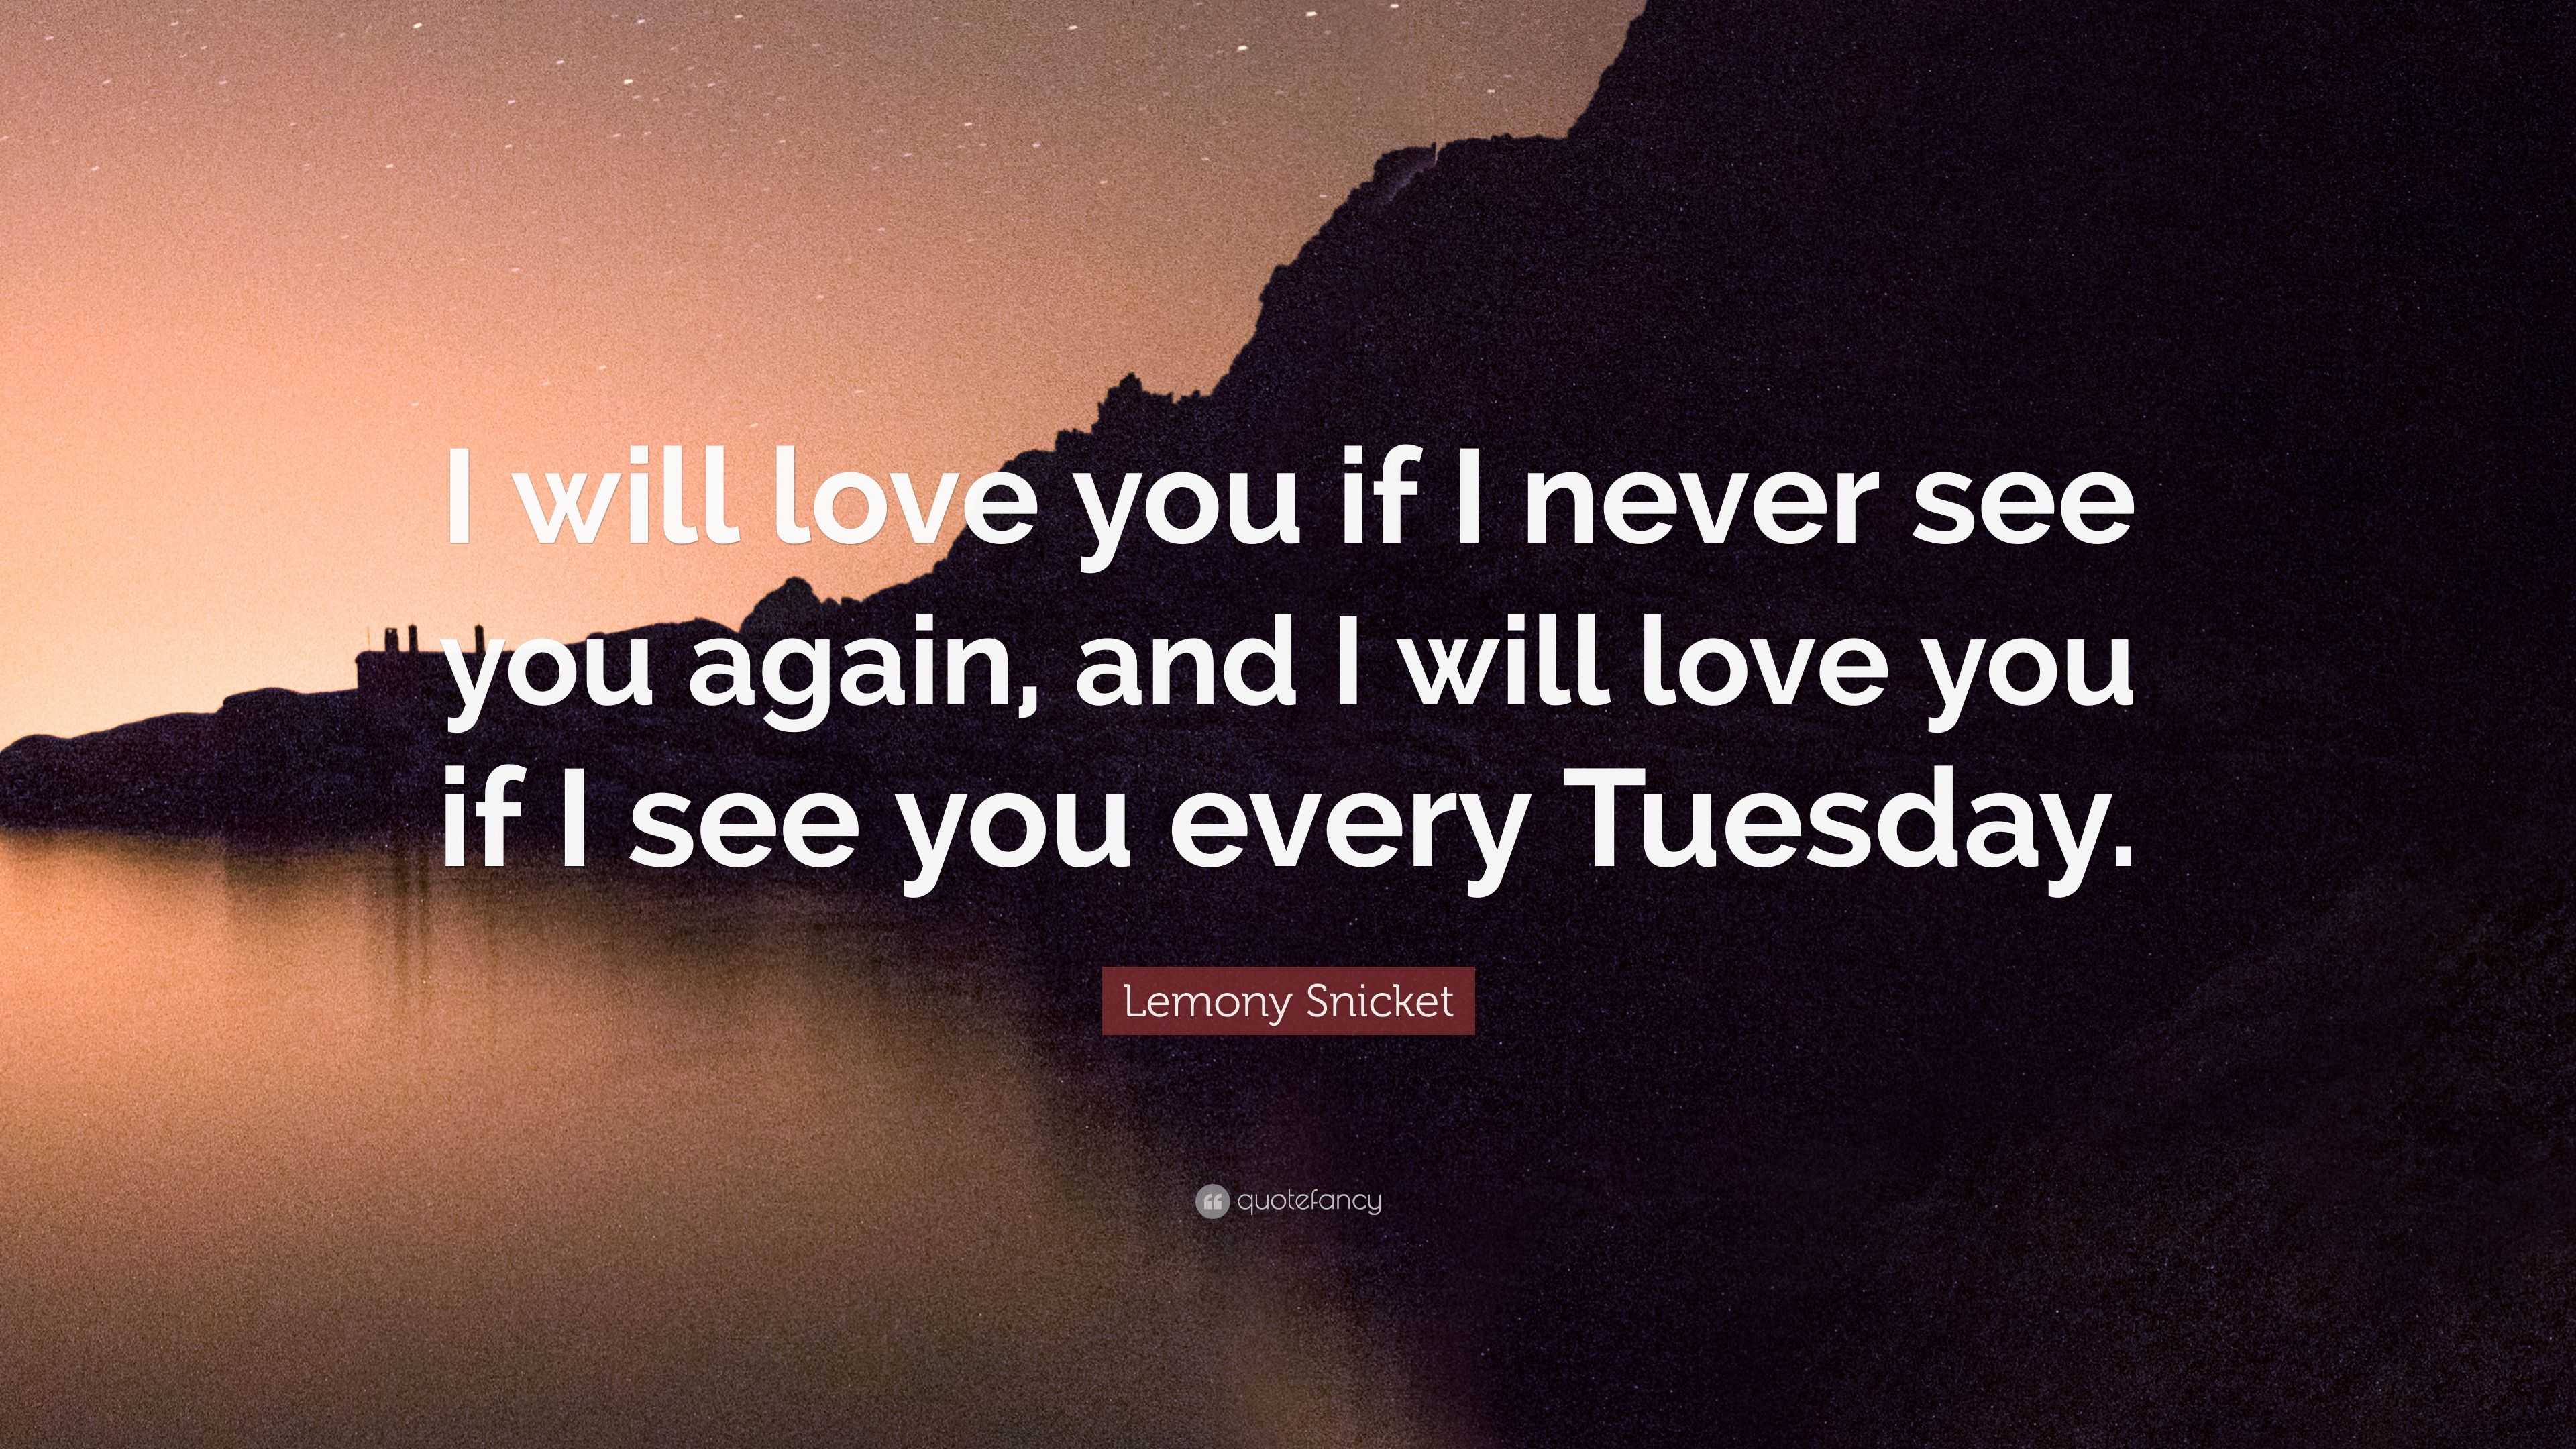 Lemony Snicket Quote “I will love you if I never see you again